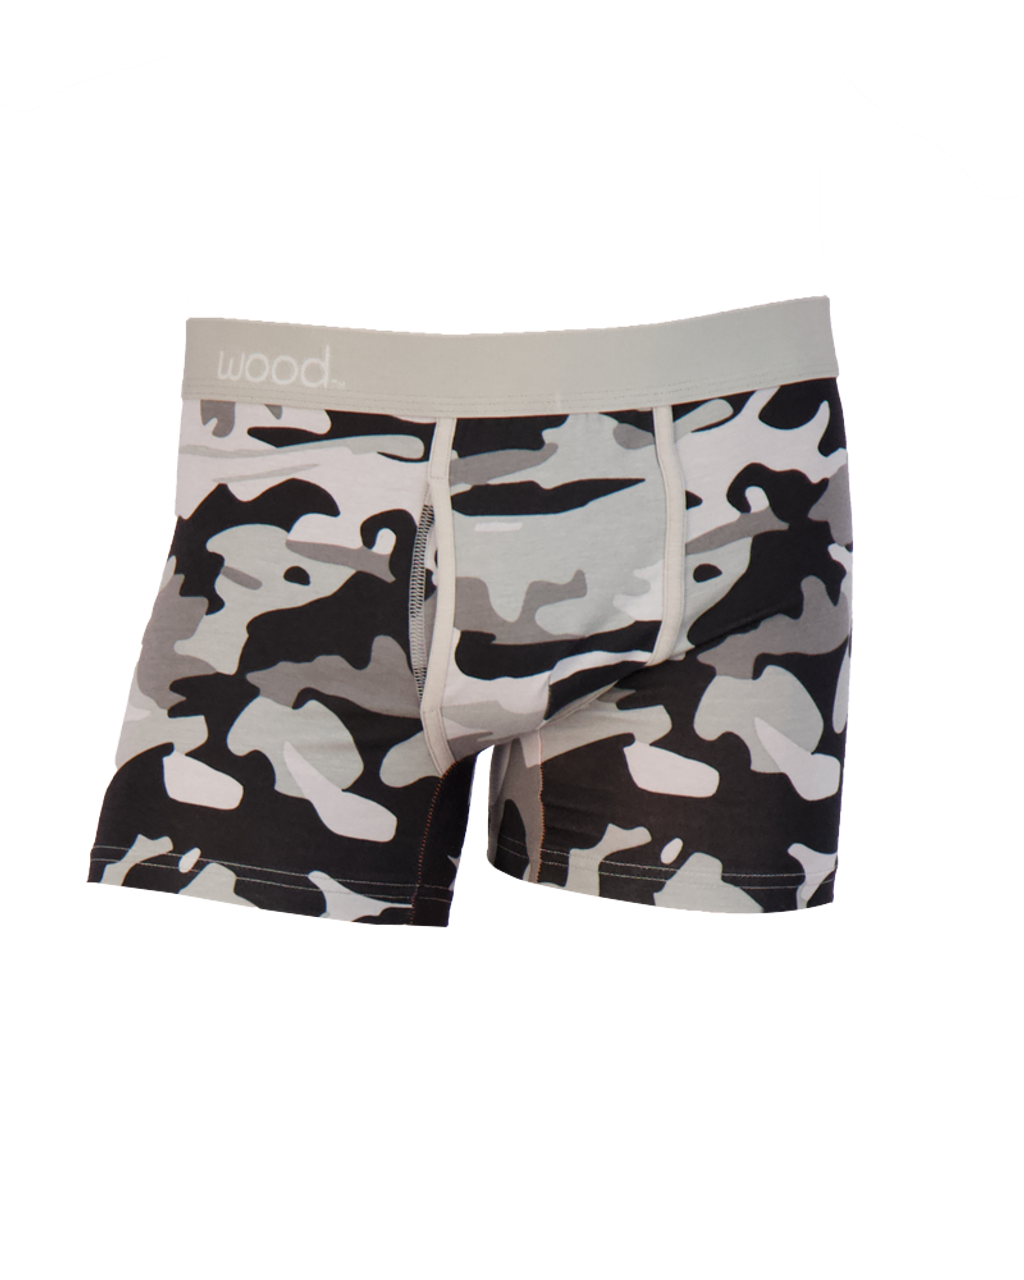 Boxer Brief w/ Fly in Ghost Camo by Wood Underwear